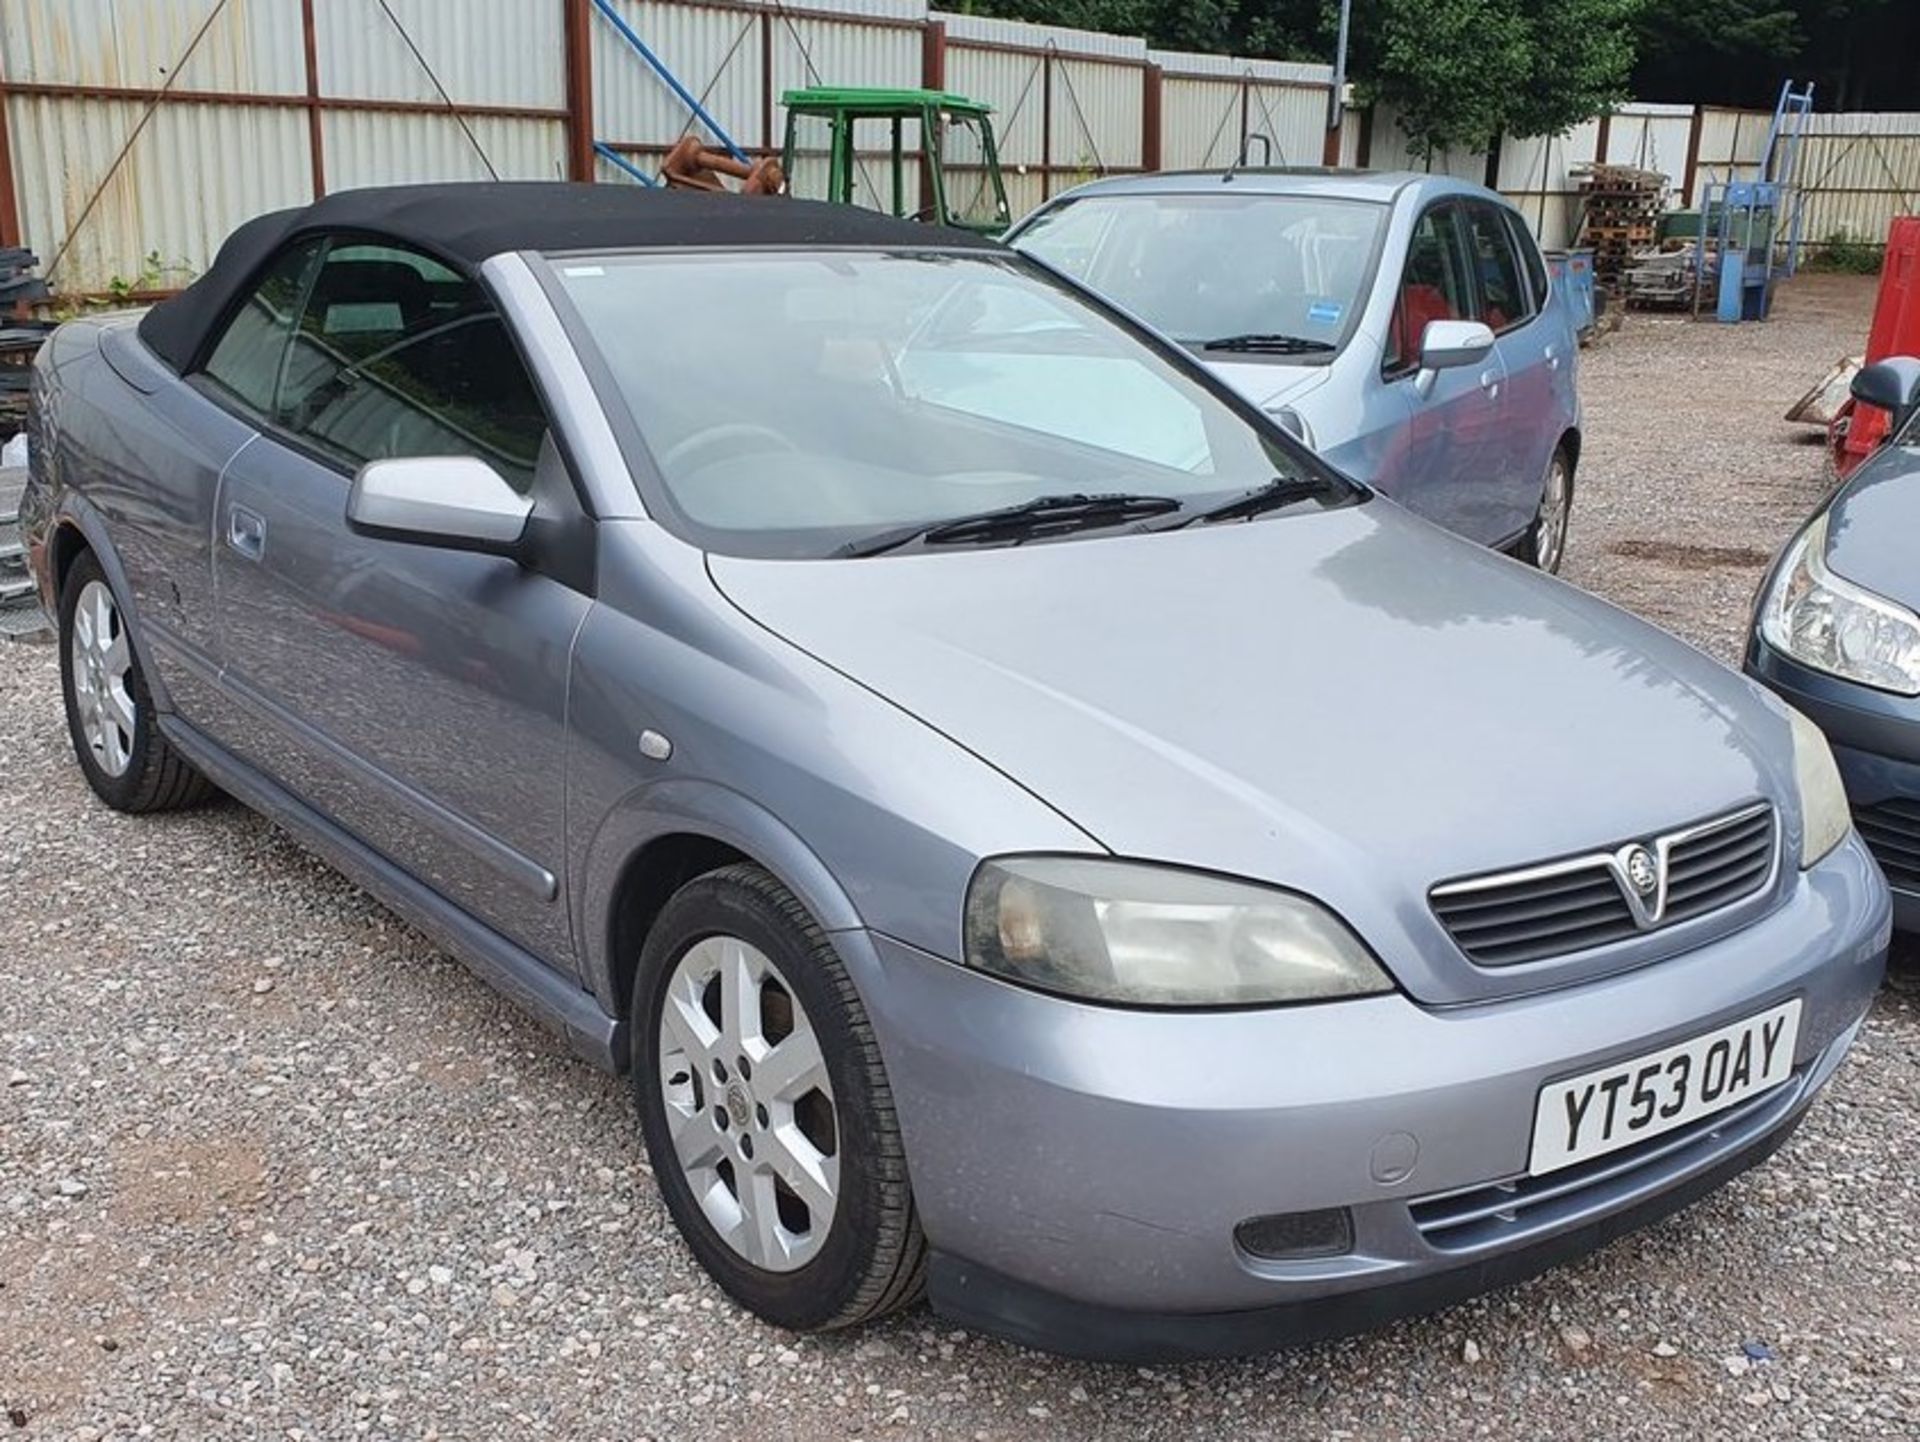 03/53 VAUXHALL ASTRA COUPE CONVERTIBLE - 1796cc 2dr Convertible (Silver, 120k)